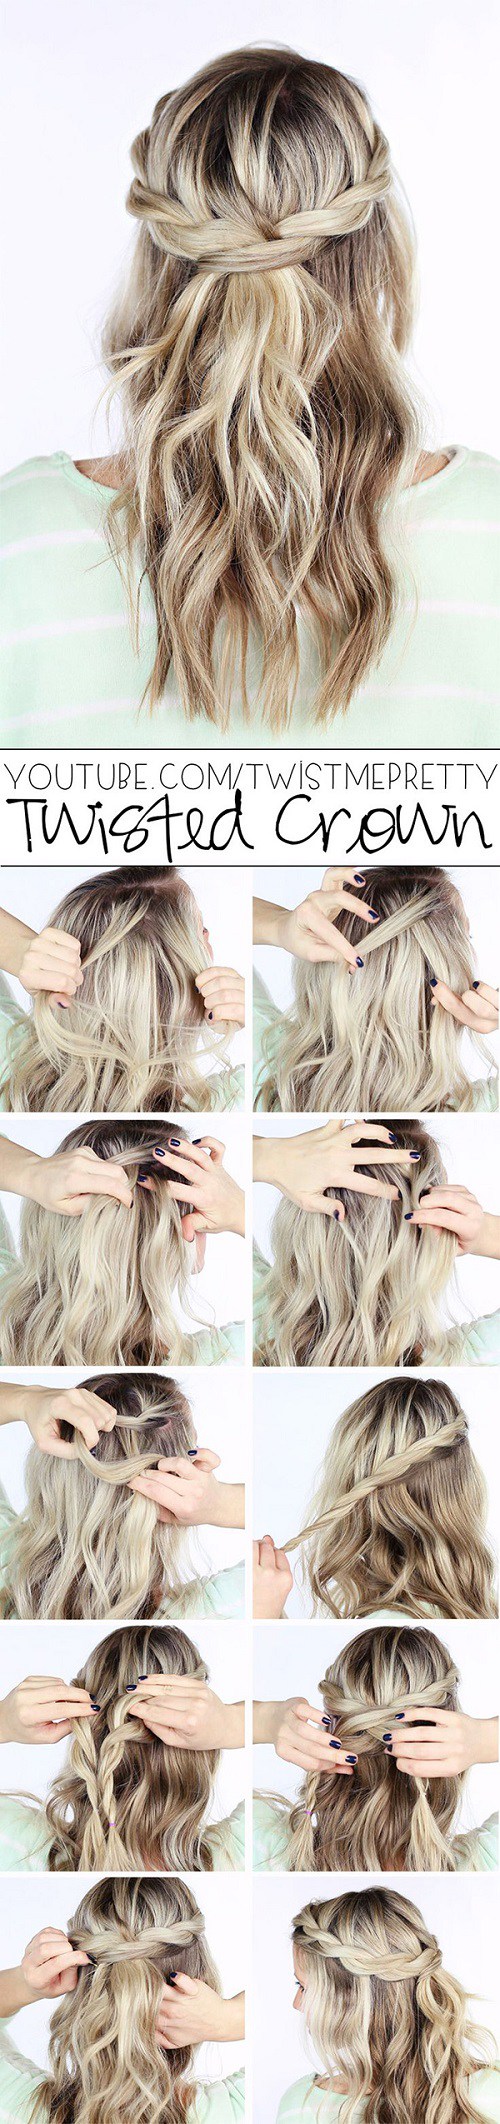 10 Amazing and Fetching Braided Tutorials That You Will Love